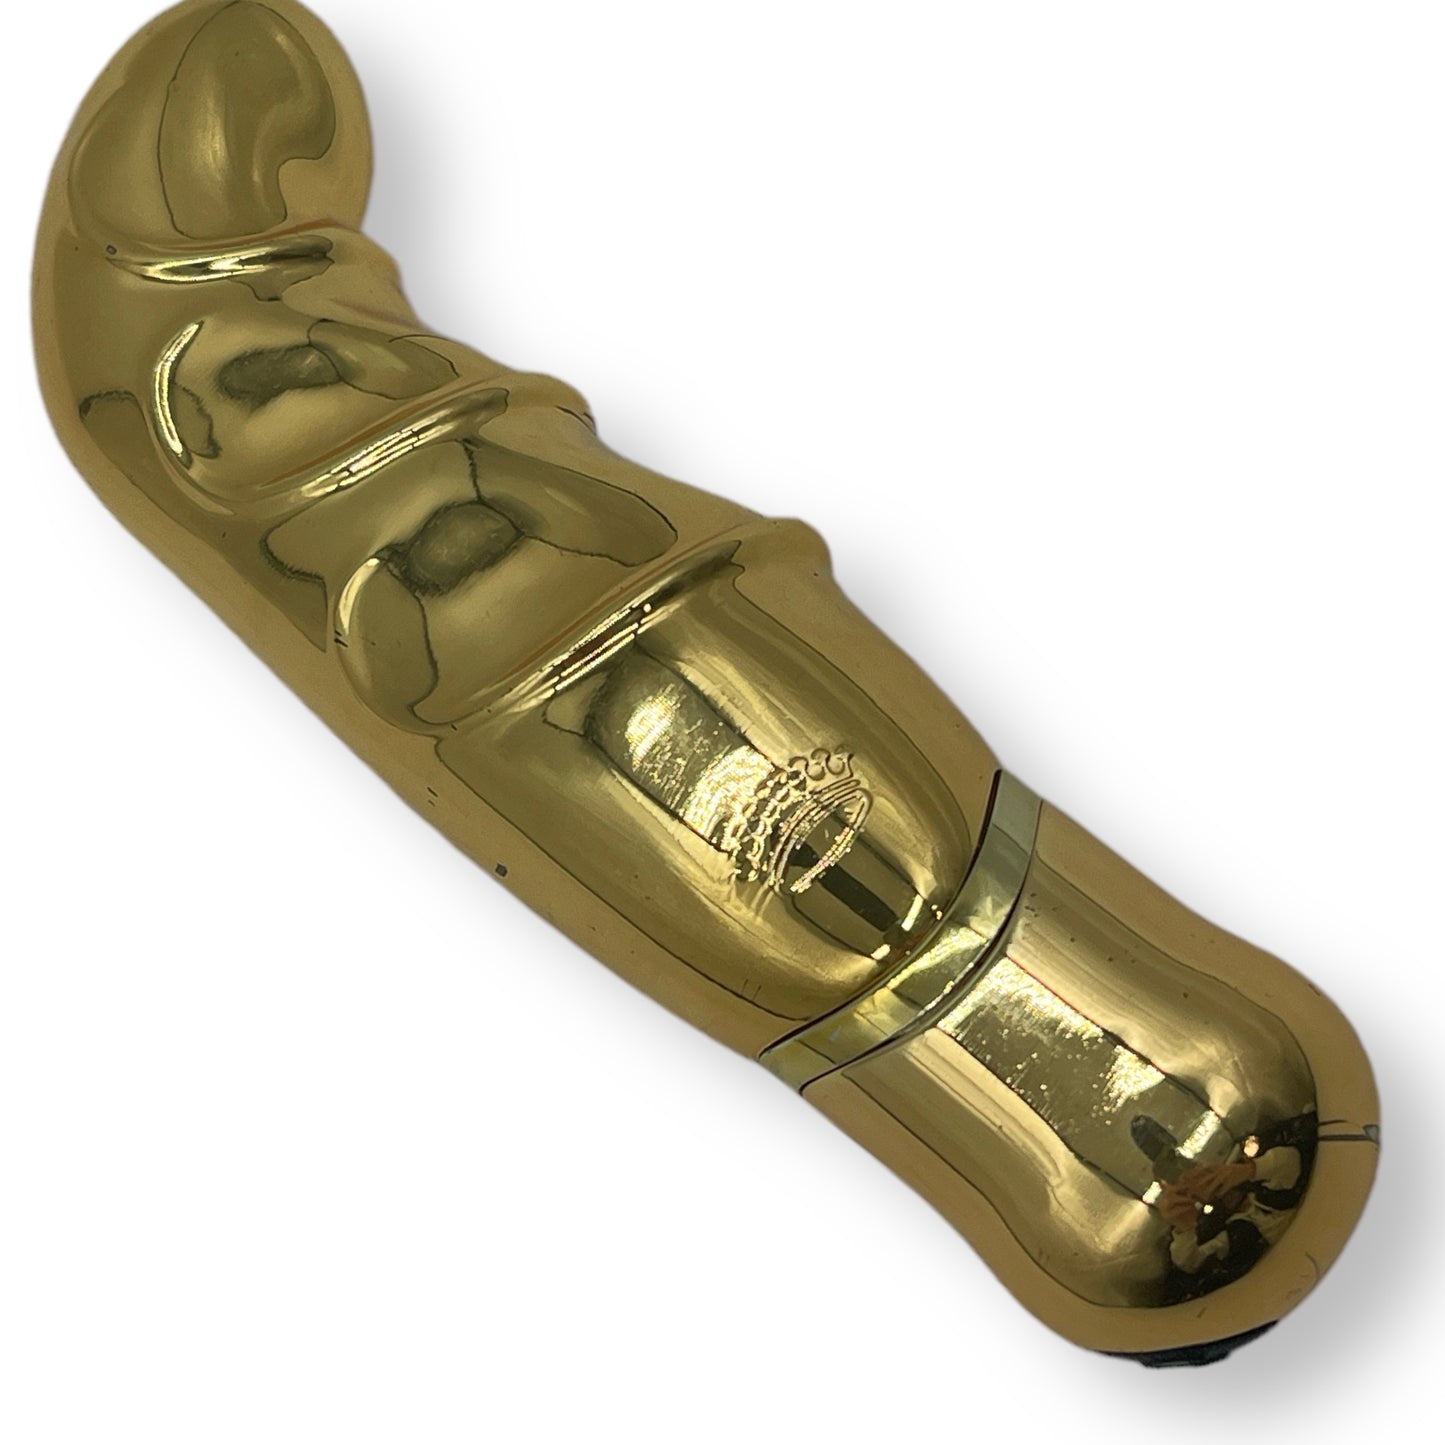 Kinky Pleasure - SC001 - Real Heavy Vibrator - Gold And Silver Series - 2 Models - 2 Colours - 1 Piece